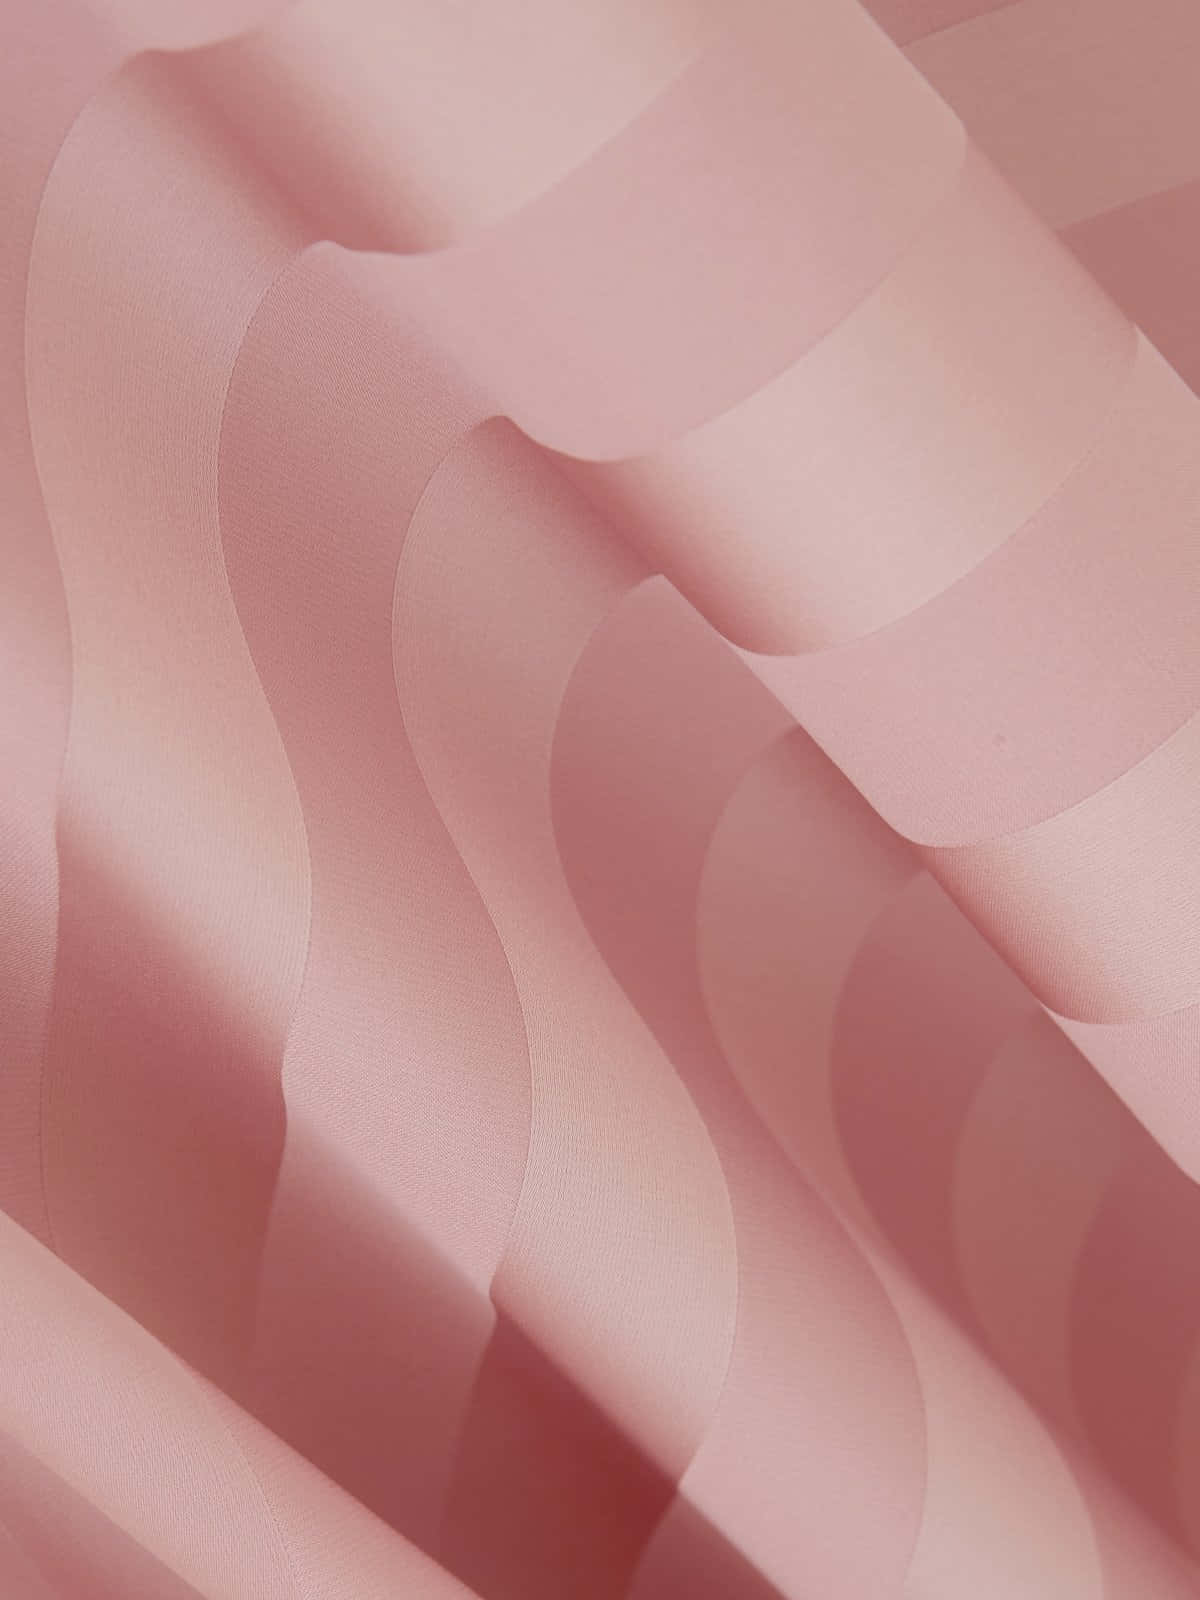 Abstract Pink Waves Texture Wallpaper